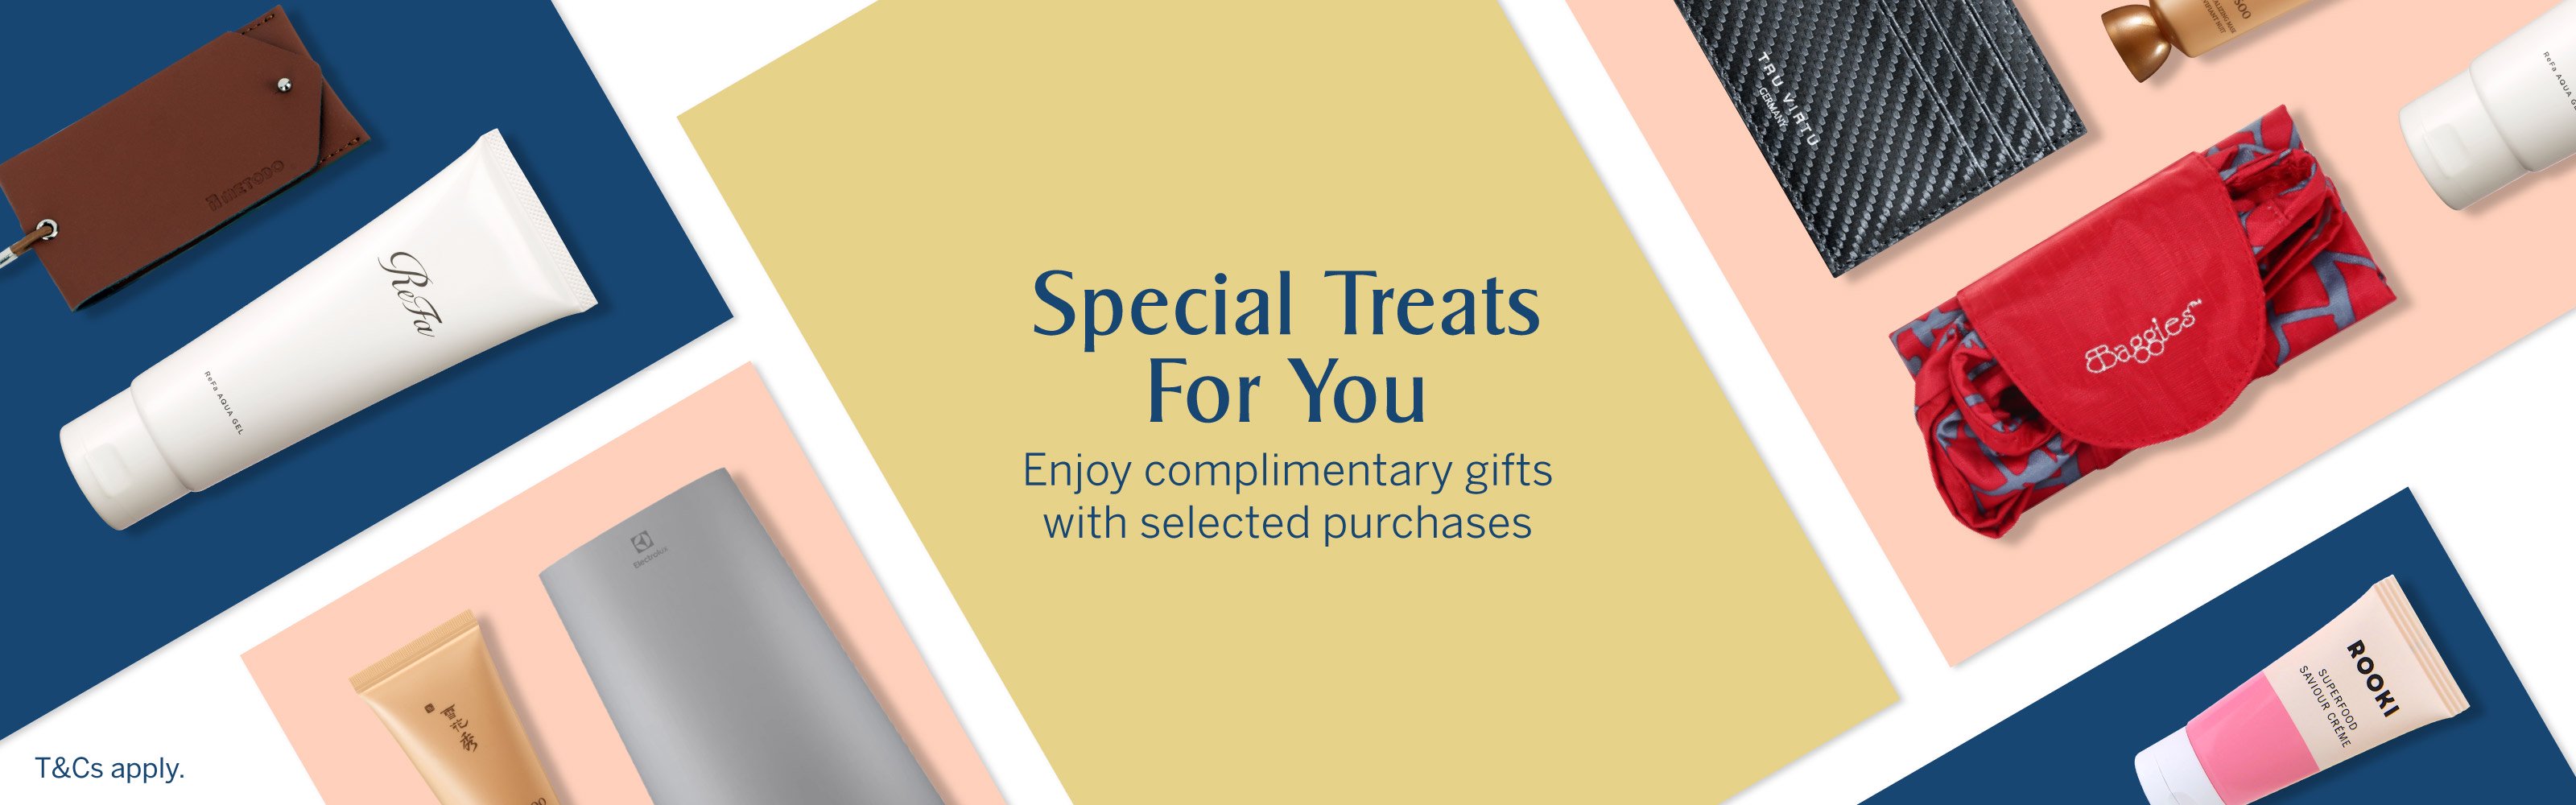 Special Treats For You - Enjoy complimentary gifts with selected purchases